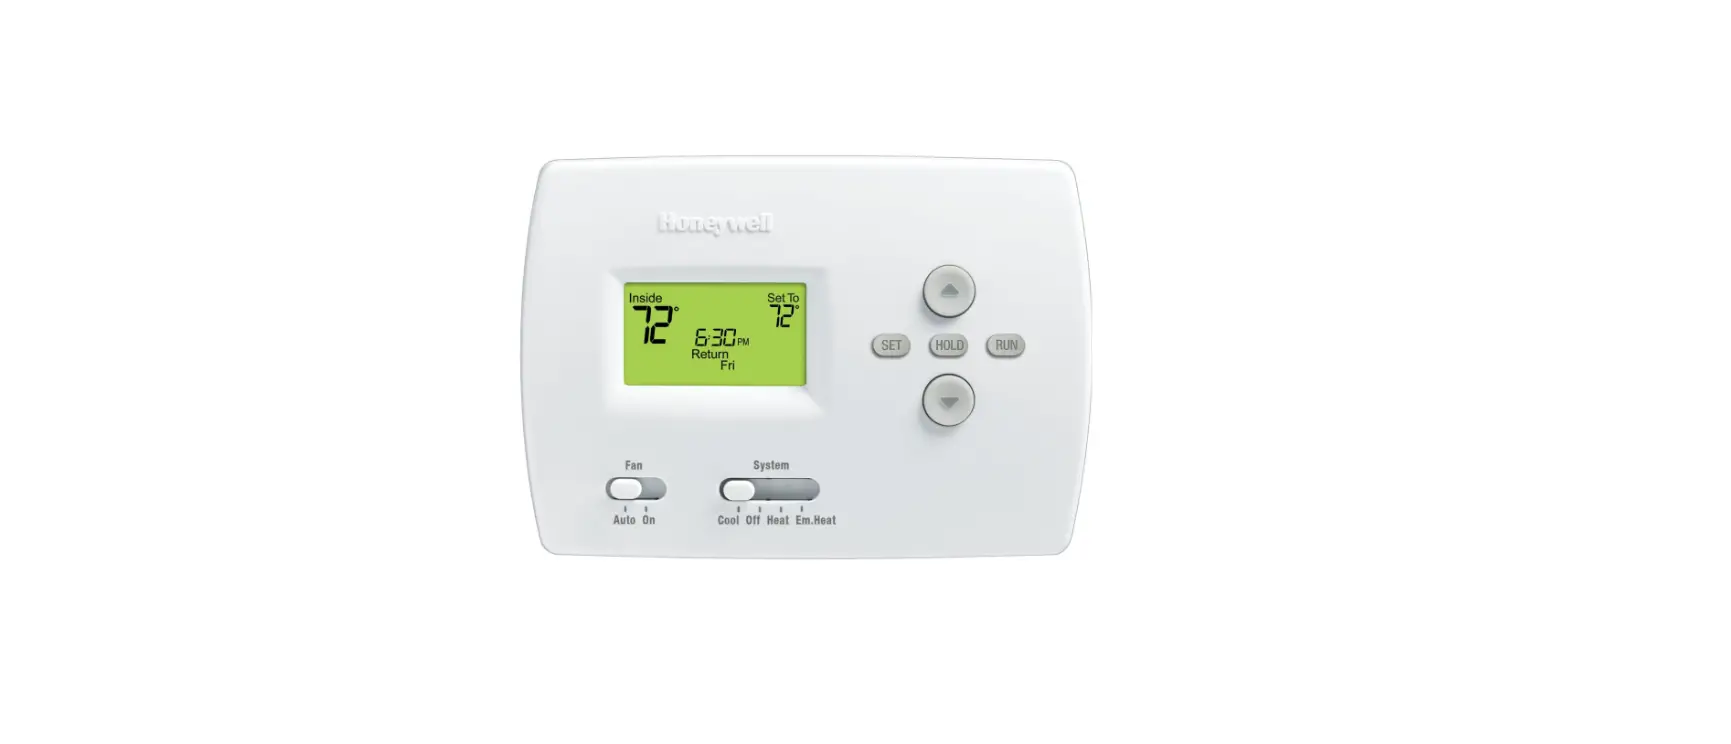 PRO 4000 Series Programmable Digital Thermostat